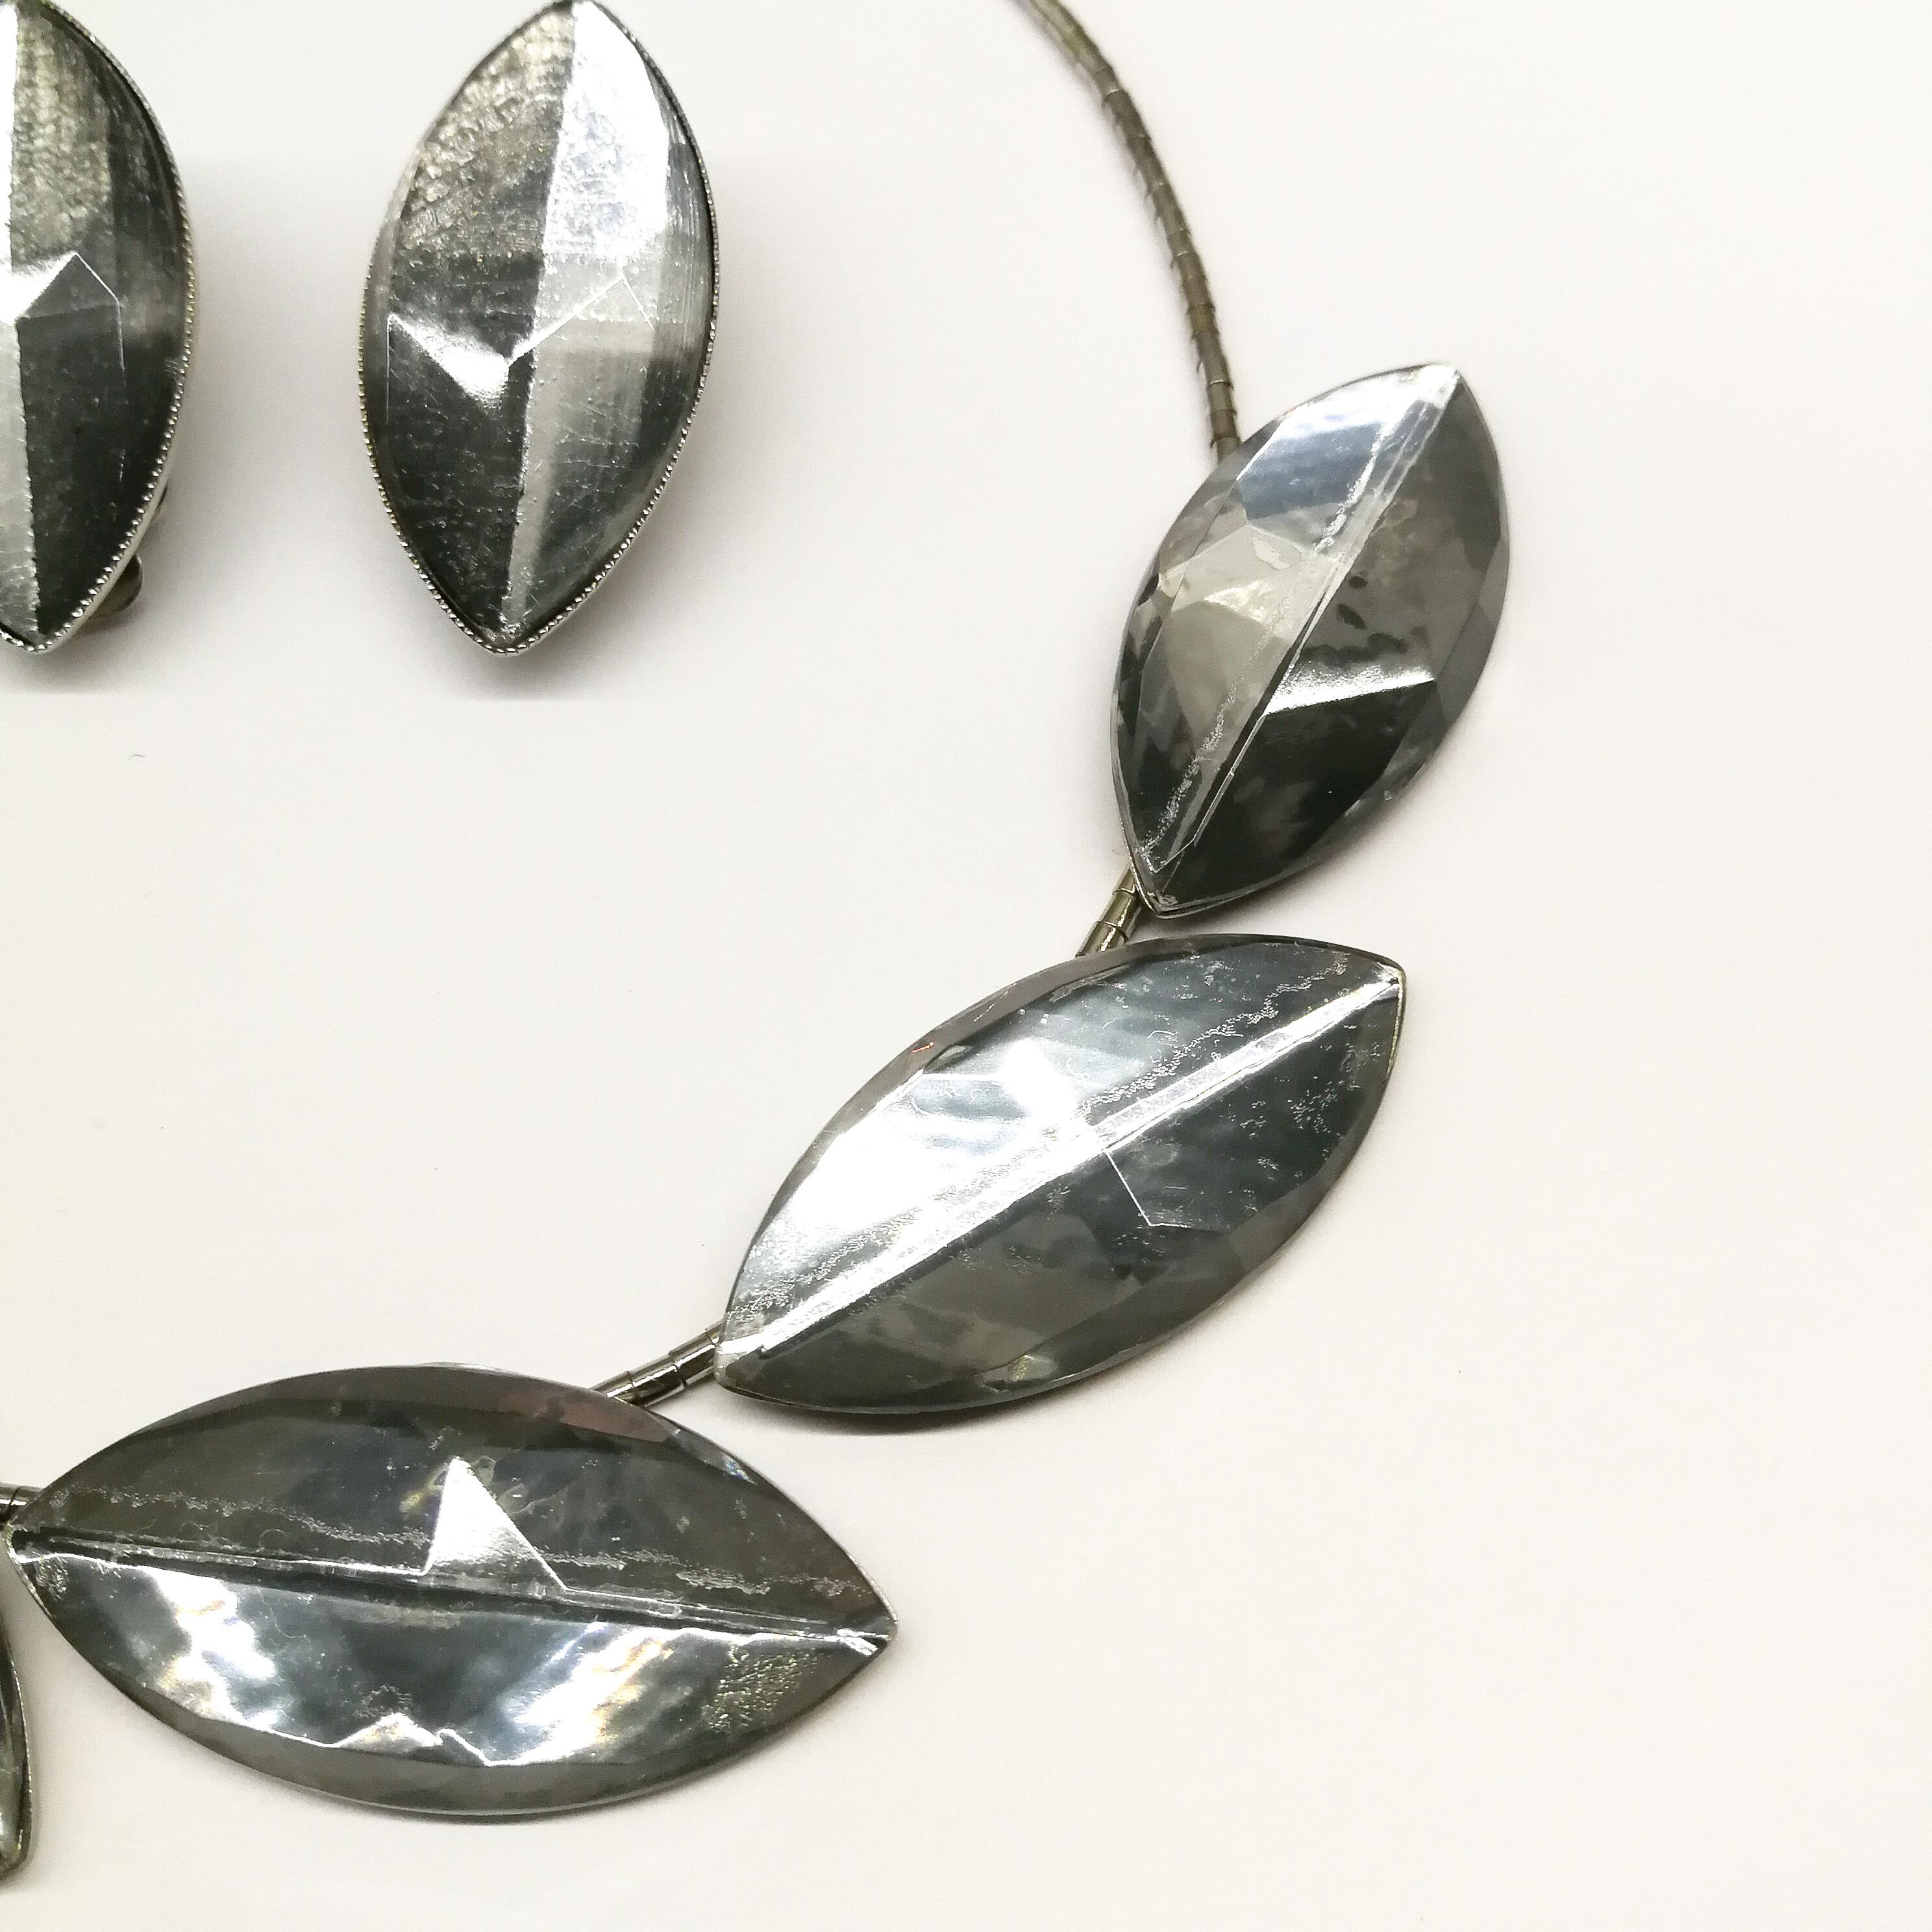 An unusual and striking necklace and earrings from this German designer, always innovative and distinctive. Constructed with very small individual metal 'beads' that form the line of the necklace, large oval and faceted smokey grey/silvery flat back